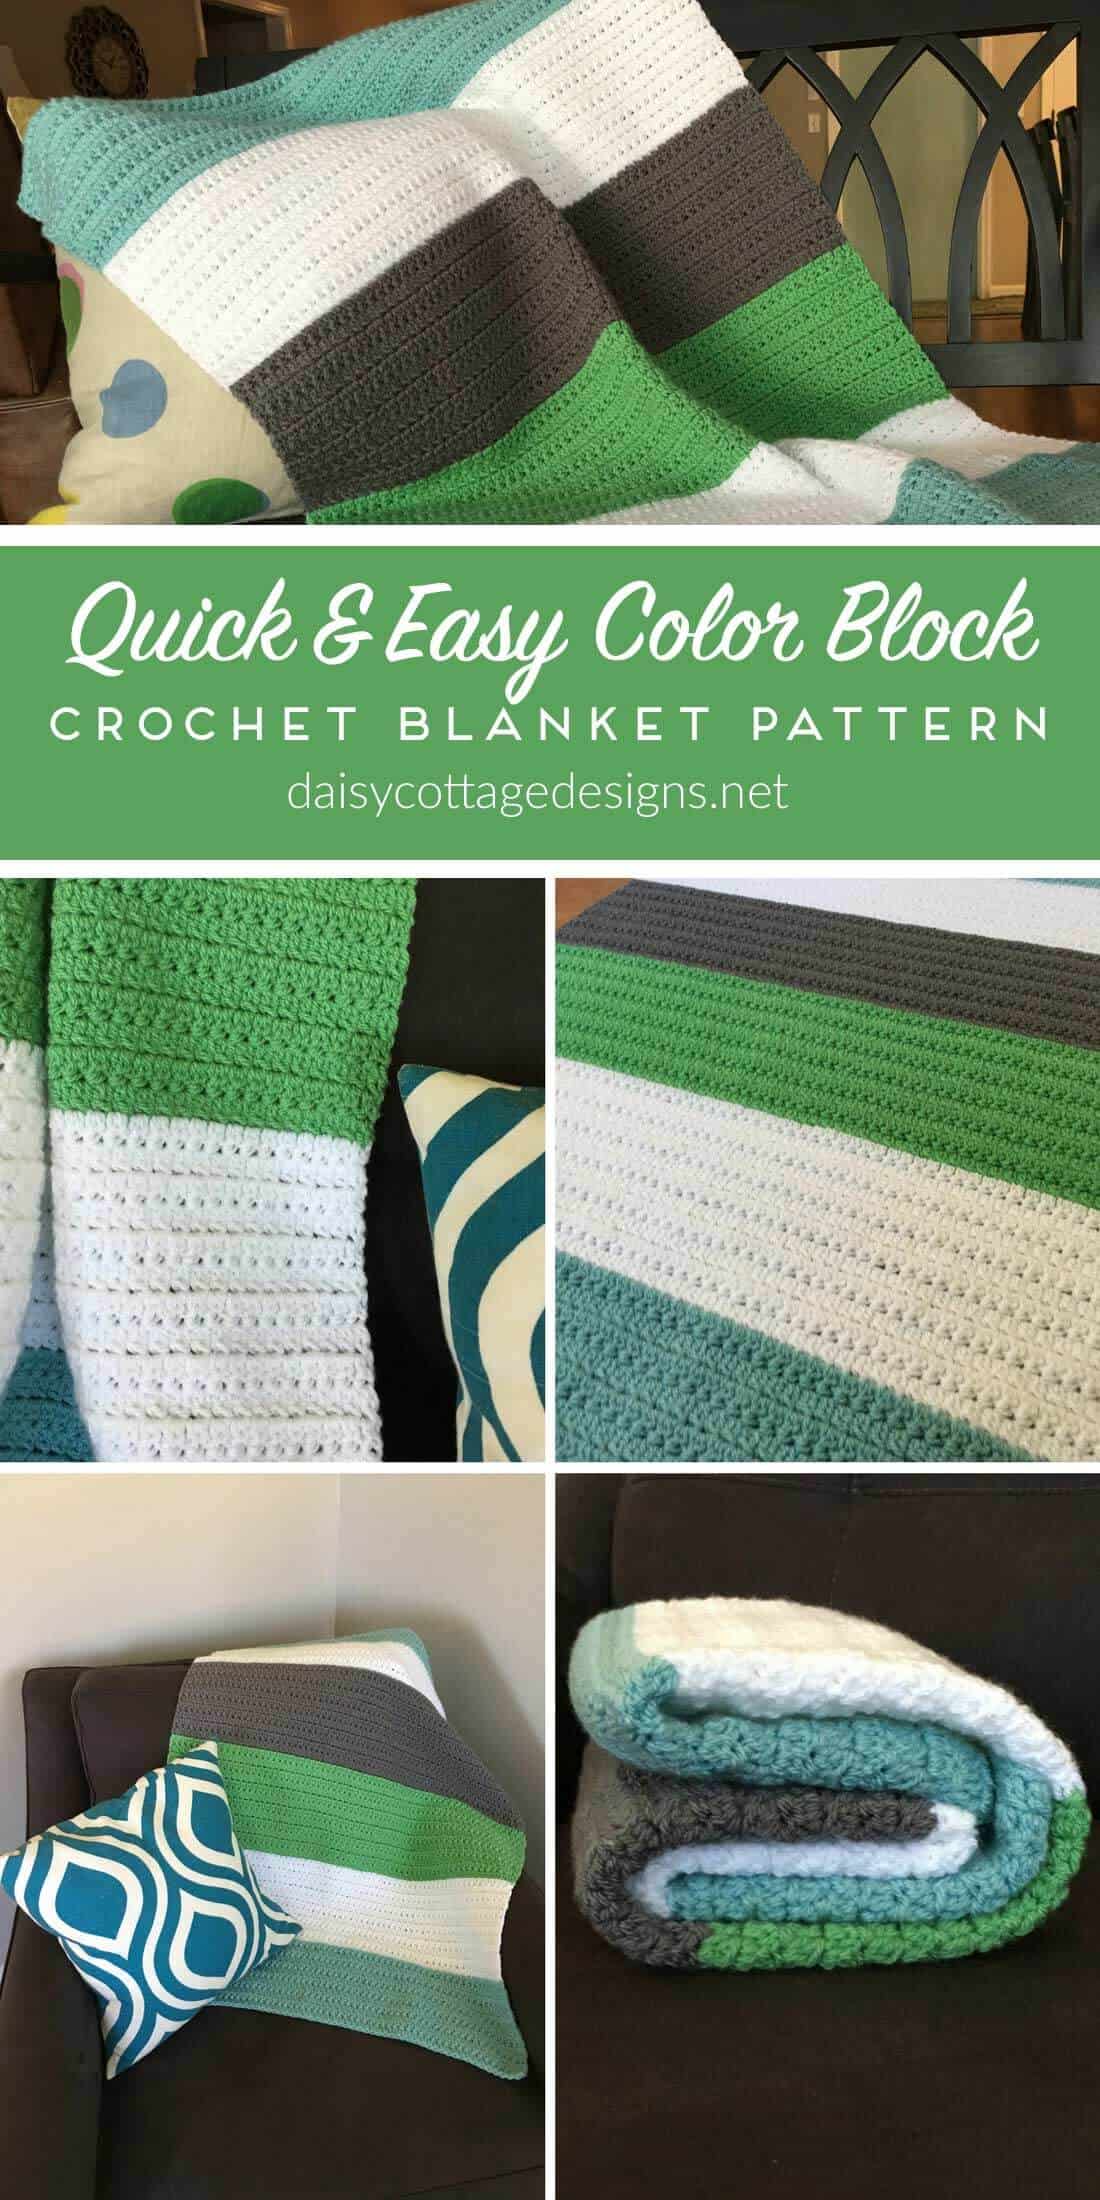 Crochet Blanket Pattern | Crochet Baby Blanket | Free Crochet Pattern | Color Block Crochet Blanket | Use this quick and easy crochet blanket pattern from Daisy Cottage Designs to create a gorgeous color block blanket for your next project.